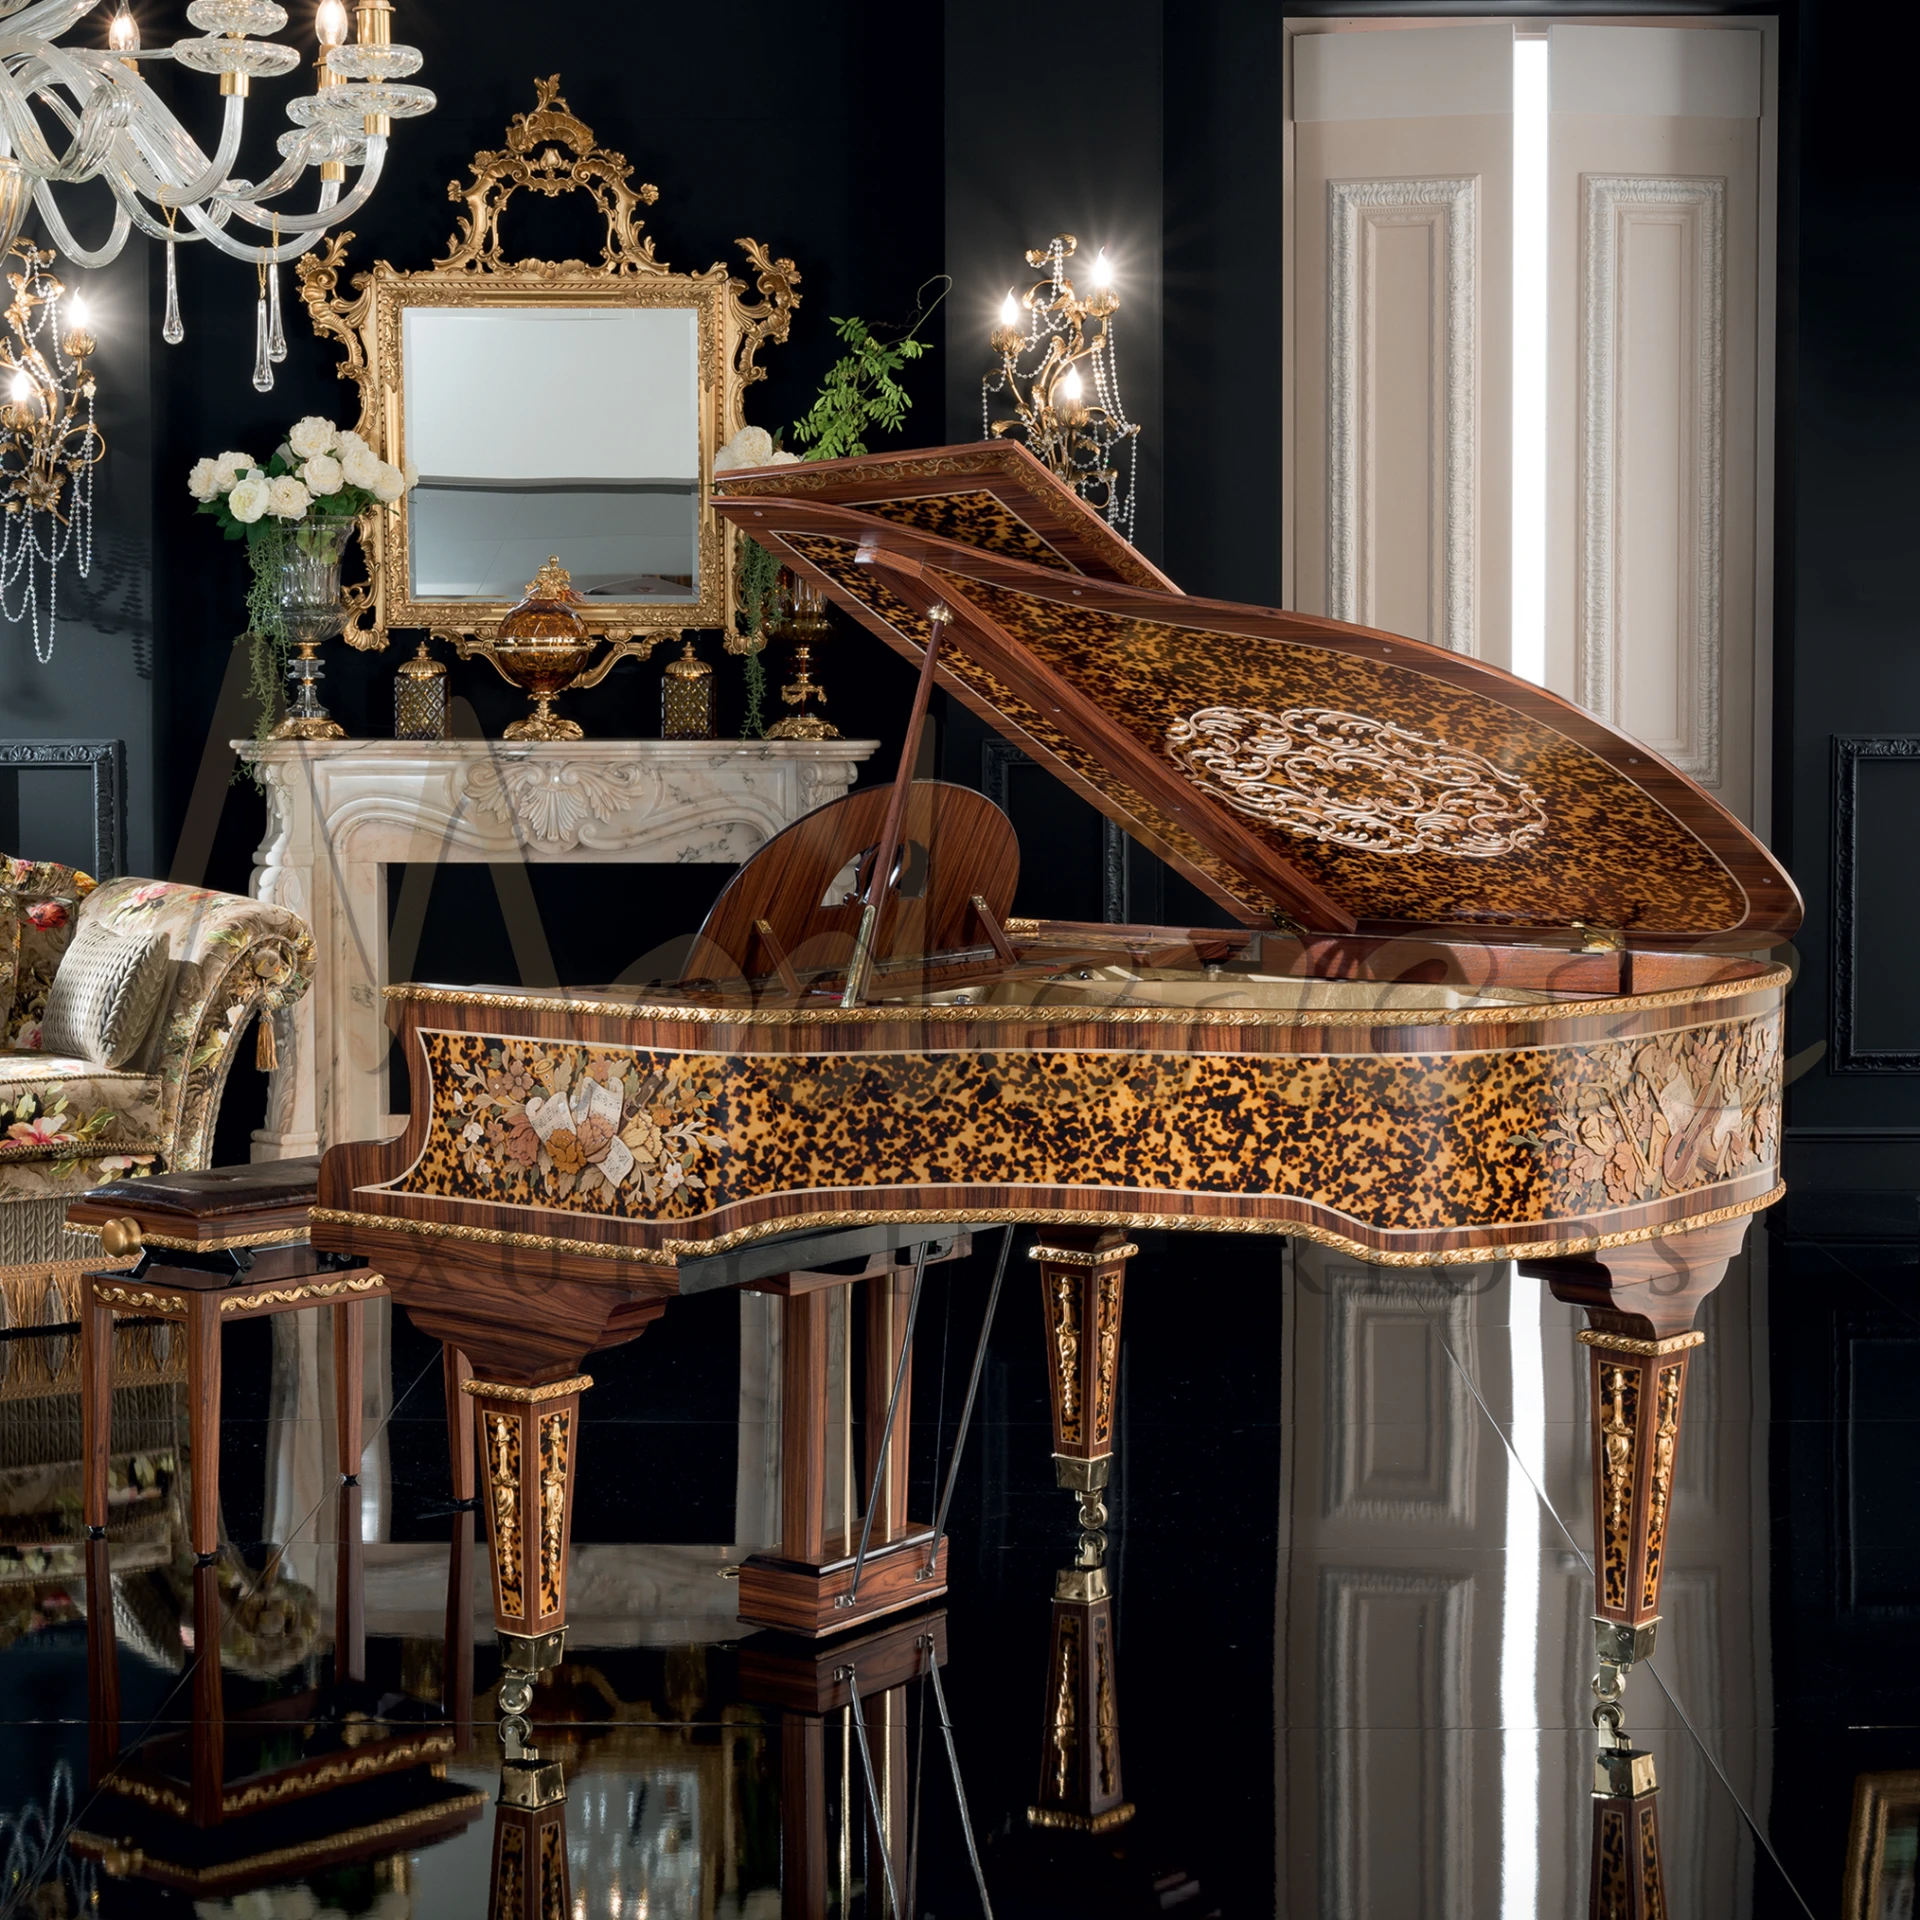 Intricate marquetry design on a Solid Wood Grand Piano, blending luxury and artistry for sophisticated musical expression.